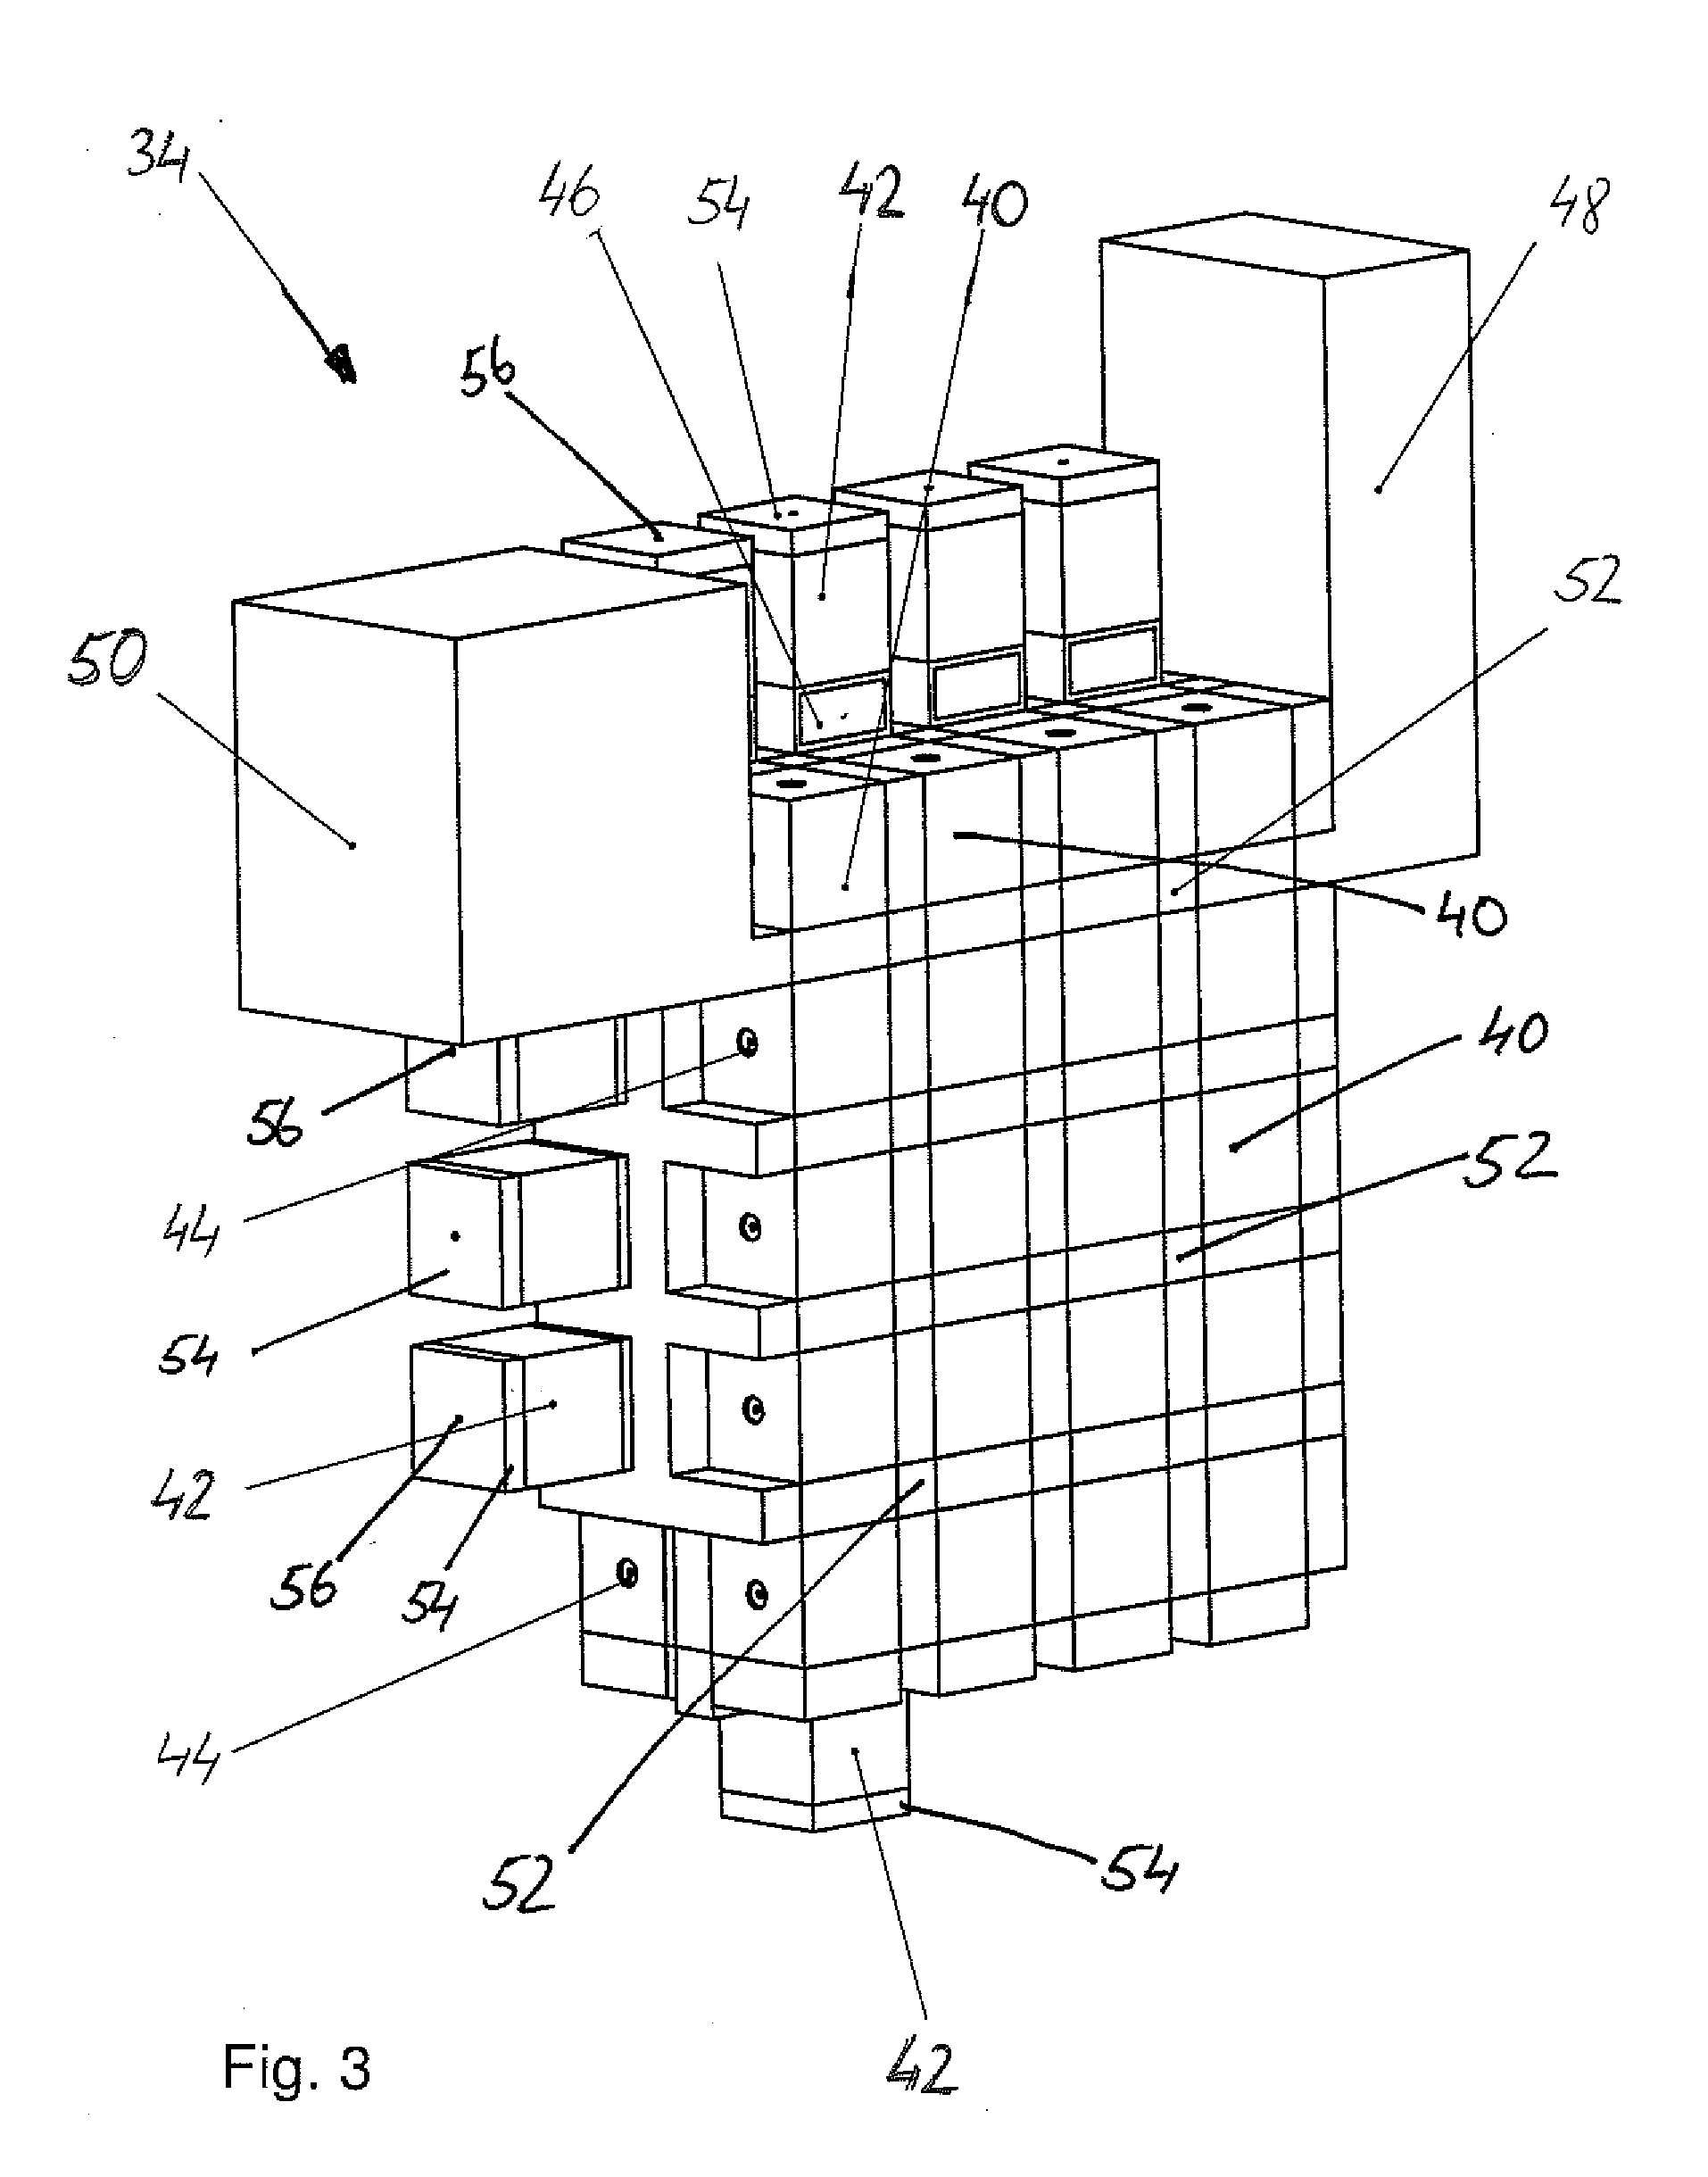 Modular laboratory apparatus for analysis and synthesis of liquids and method for analysis and synthesis of liquids